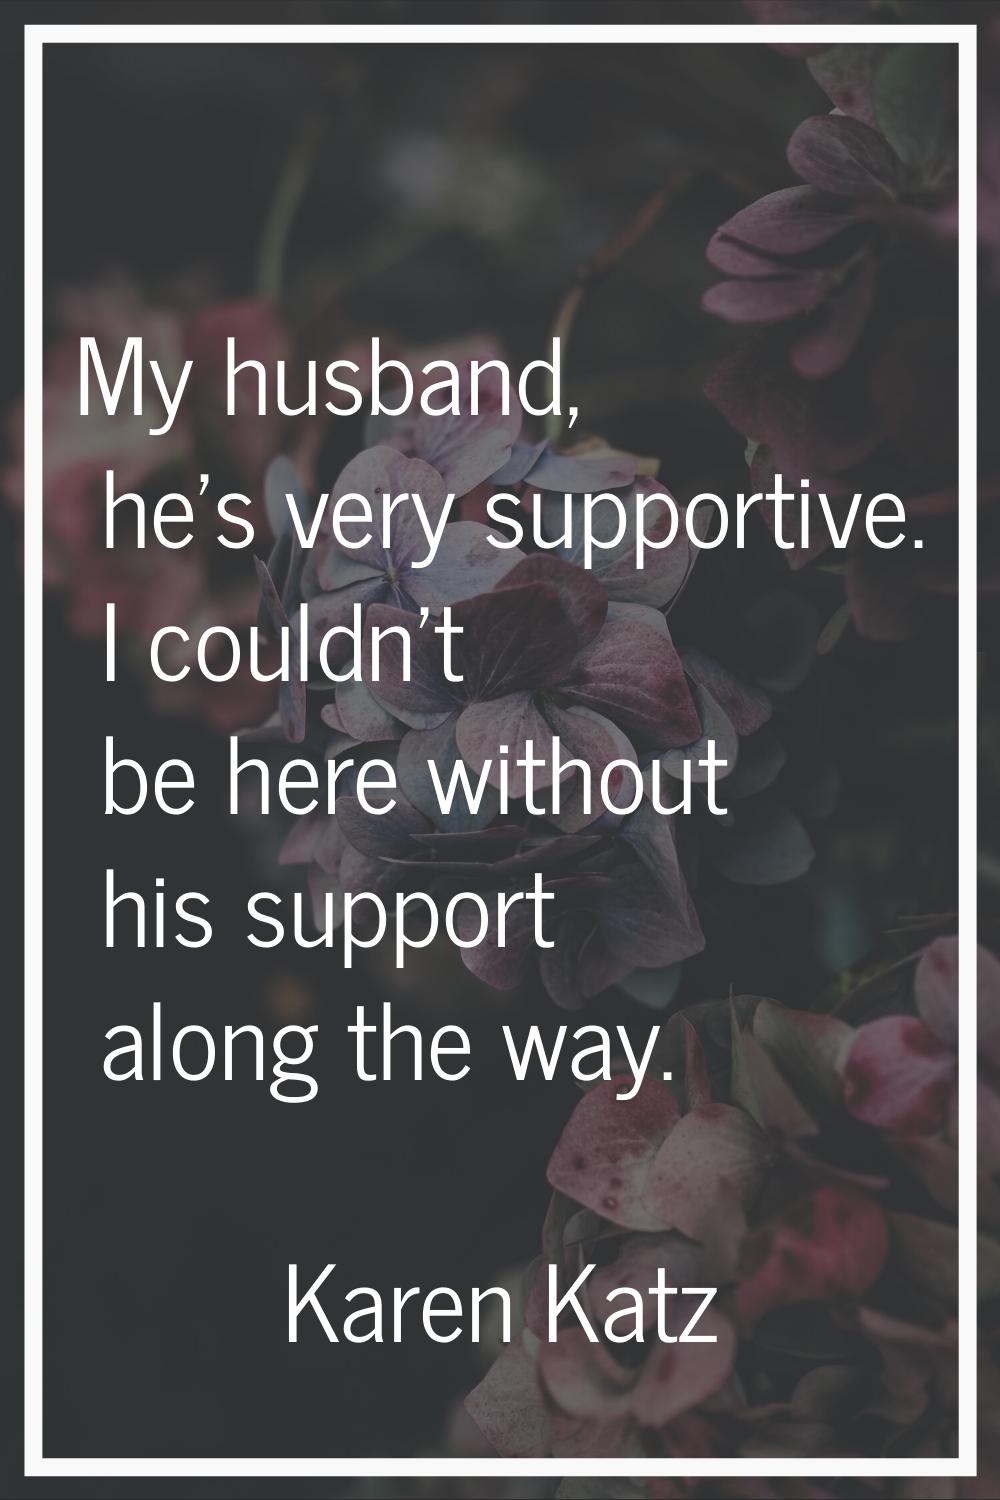 My husband, he's very supportive. I couldn't be here without his support along the way.